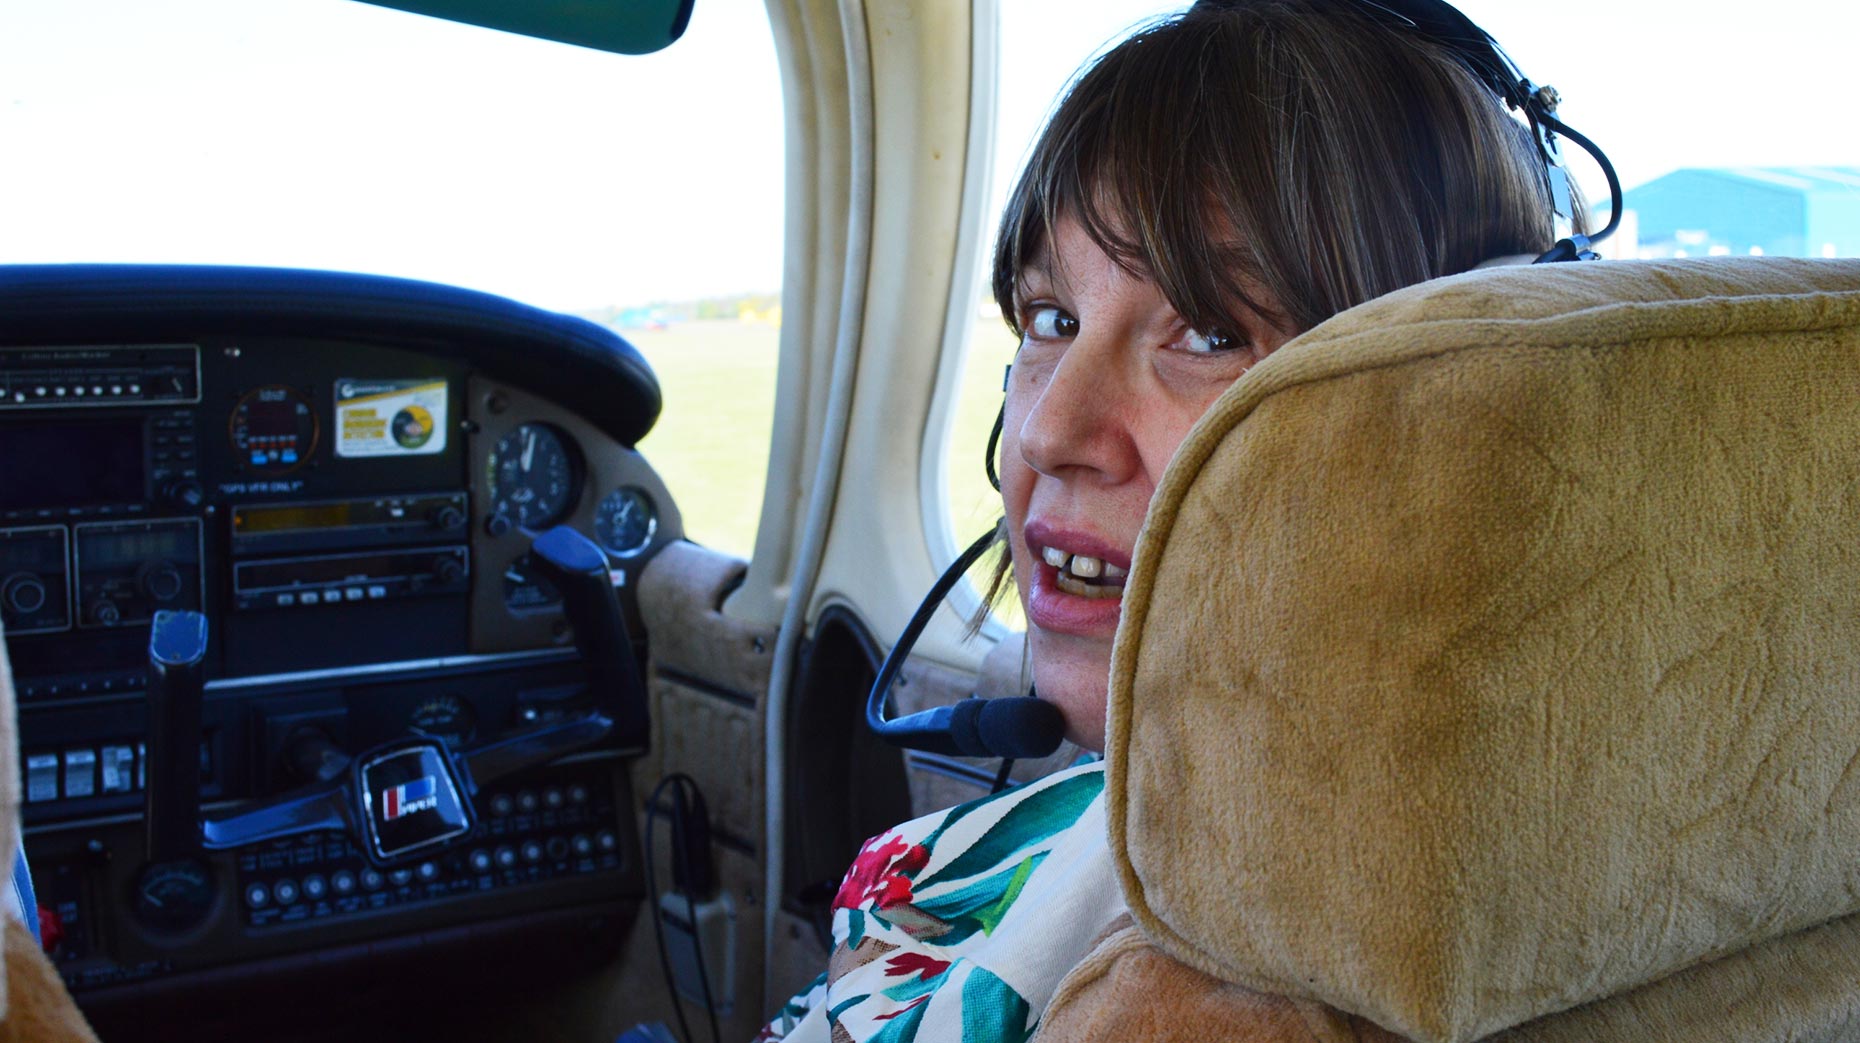 Chrissy King loved her first flight across the skies of Lincolnshire.